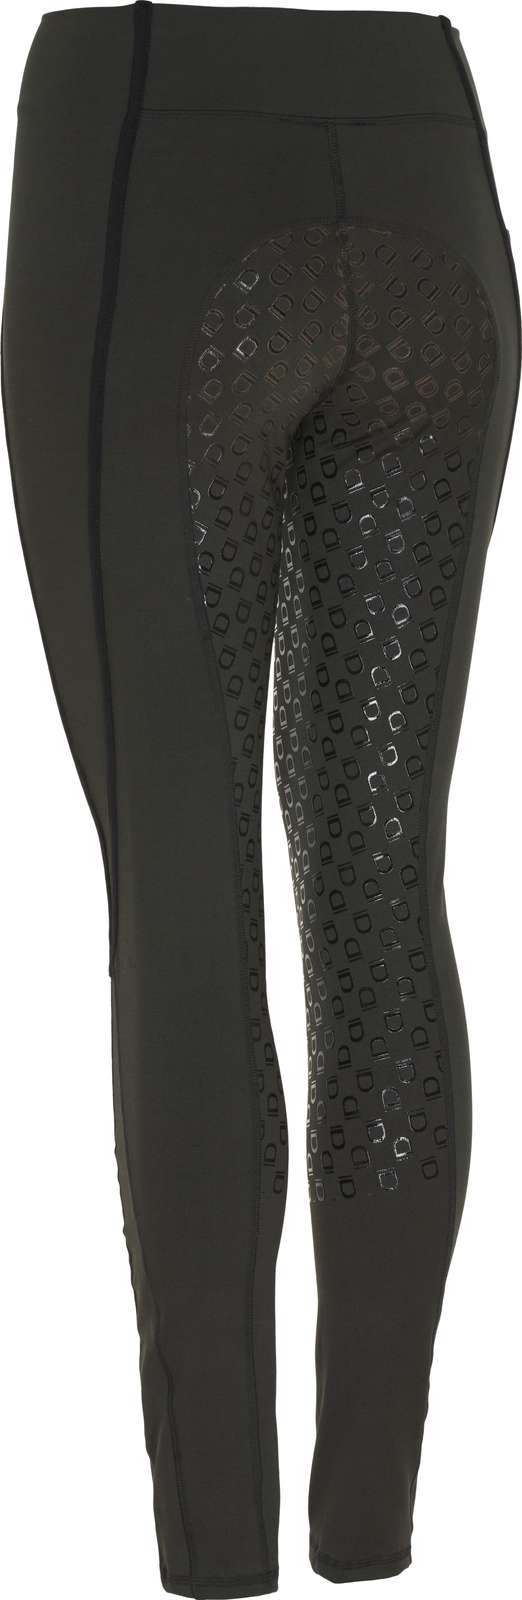 Equipage Finley fuldgrip tights